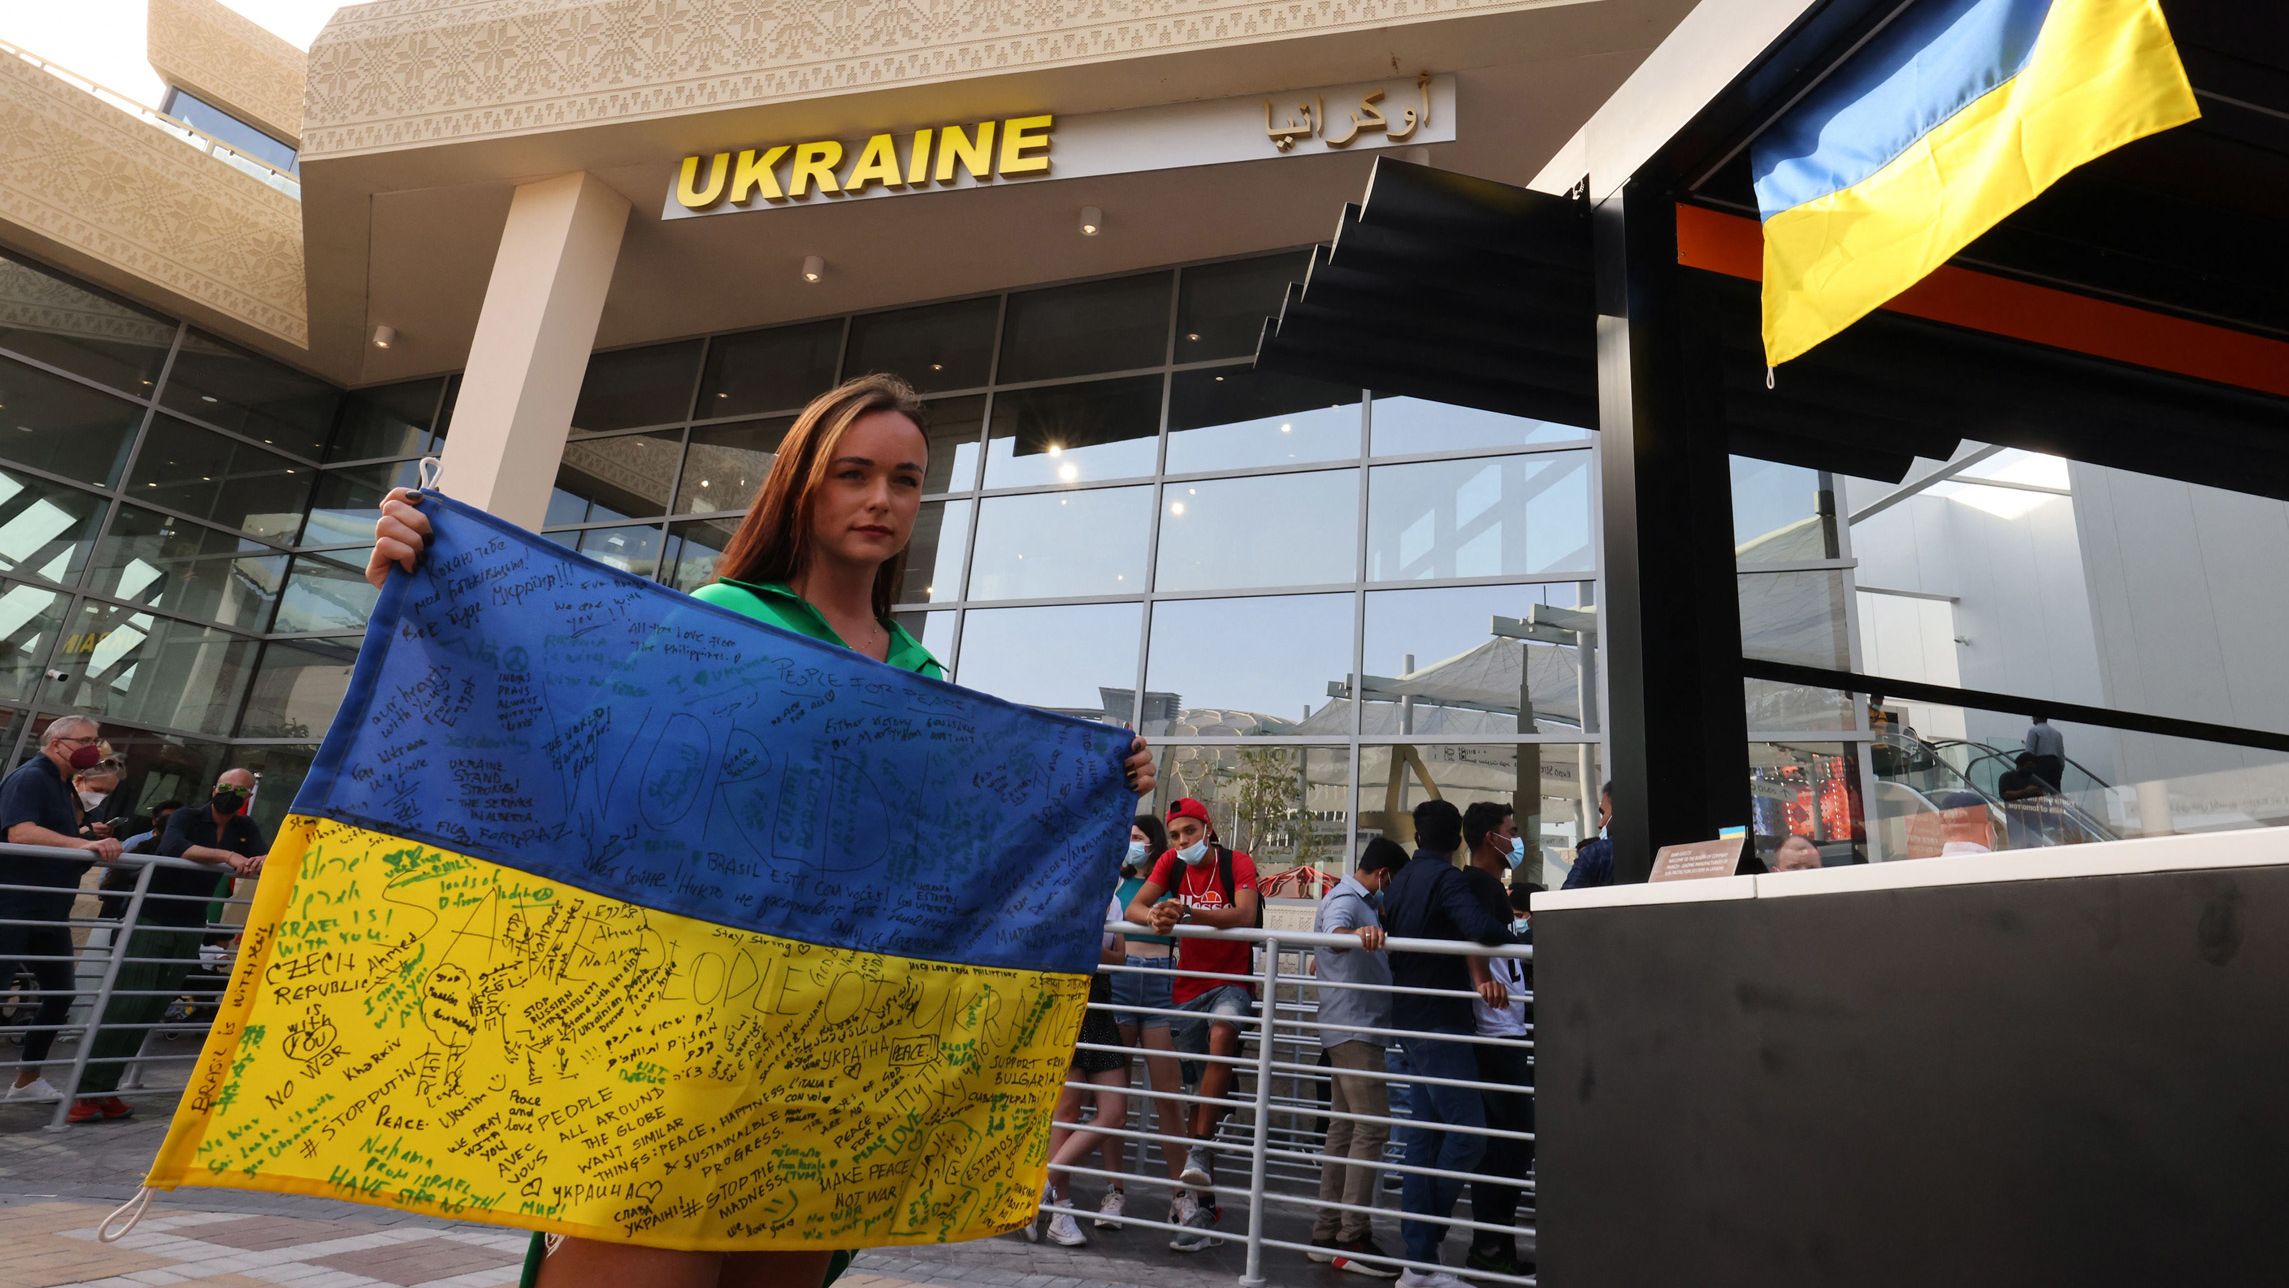 A woman poses for a picture with a signed Ukranian flag at the Ukraine pavillion at Expo 2020 in Dubai, on February 27.